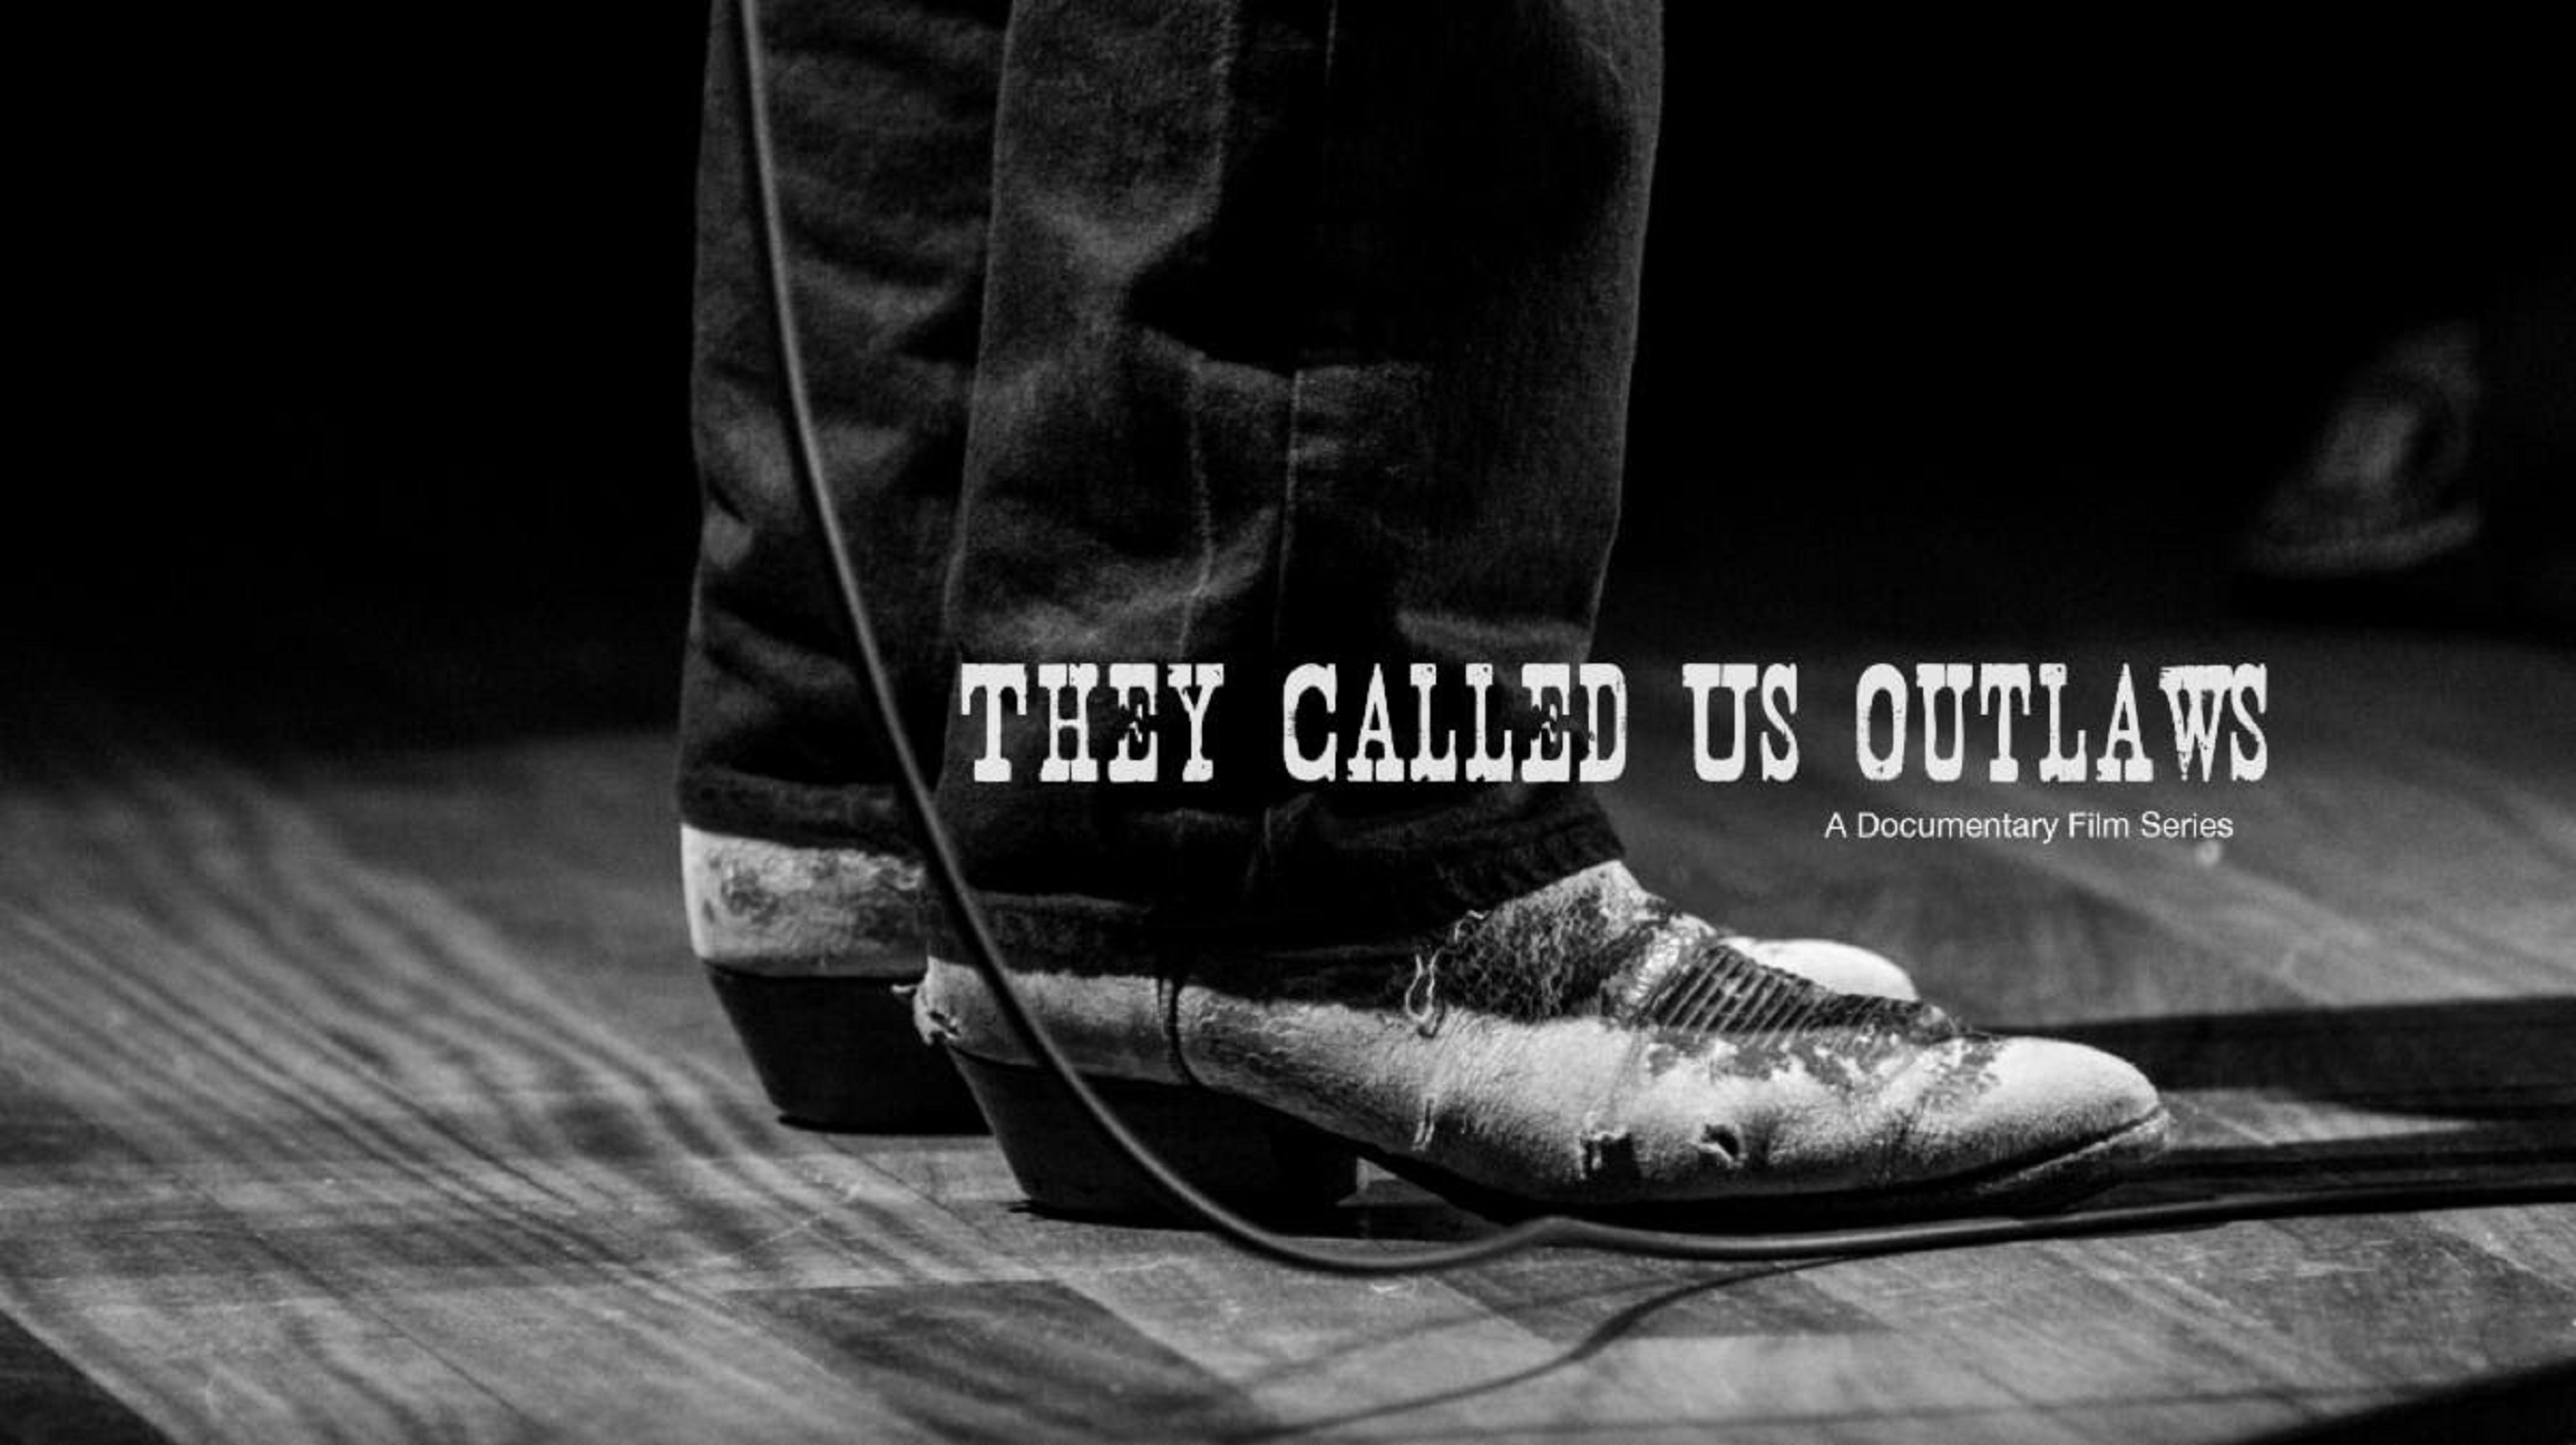 Chris Shiflett to host GRAMMY Museum event on 12/5 for 'They Called Us Outlaws' film series